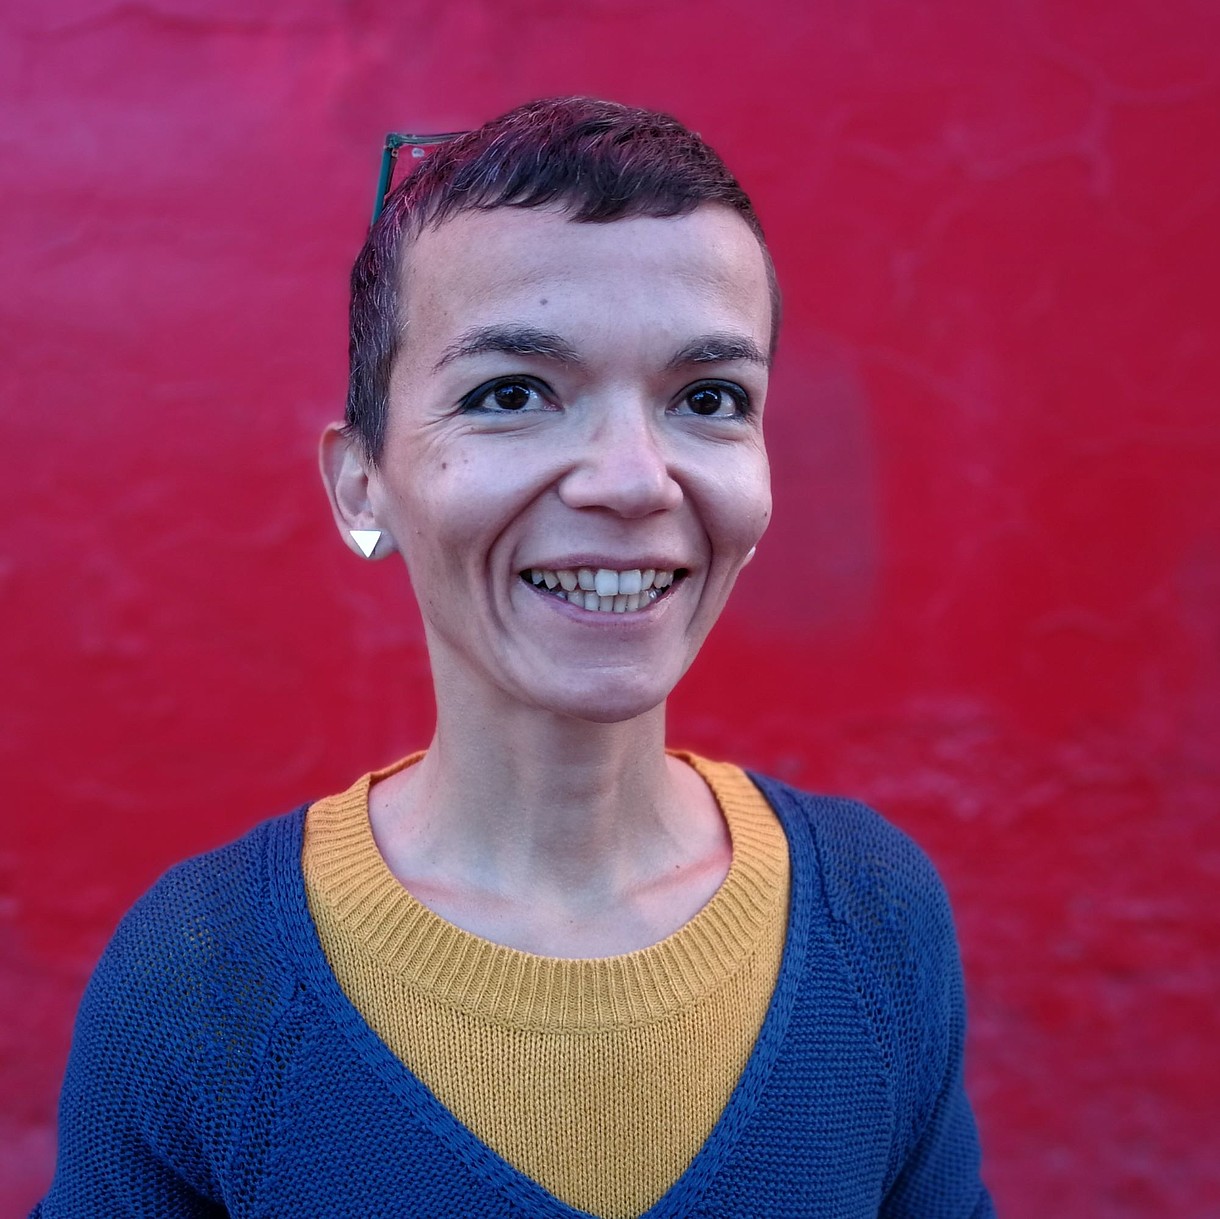  Portrait of a person standing in front of a red wall and smiling into the camera.